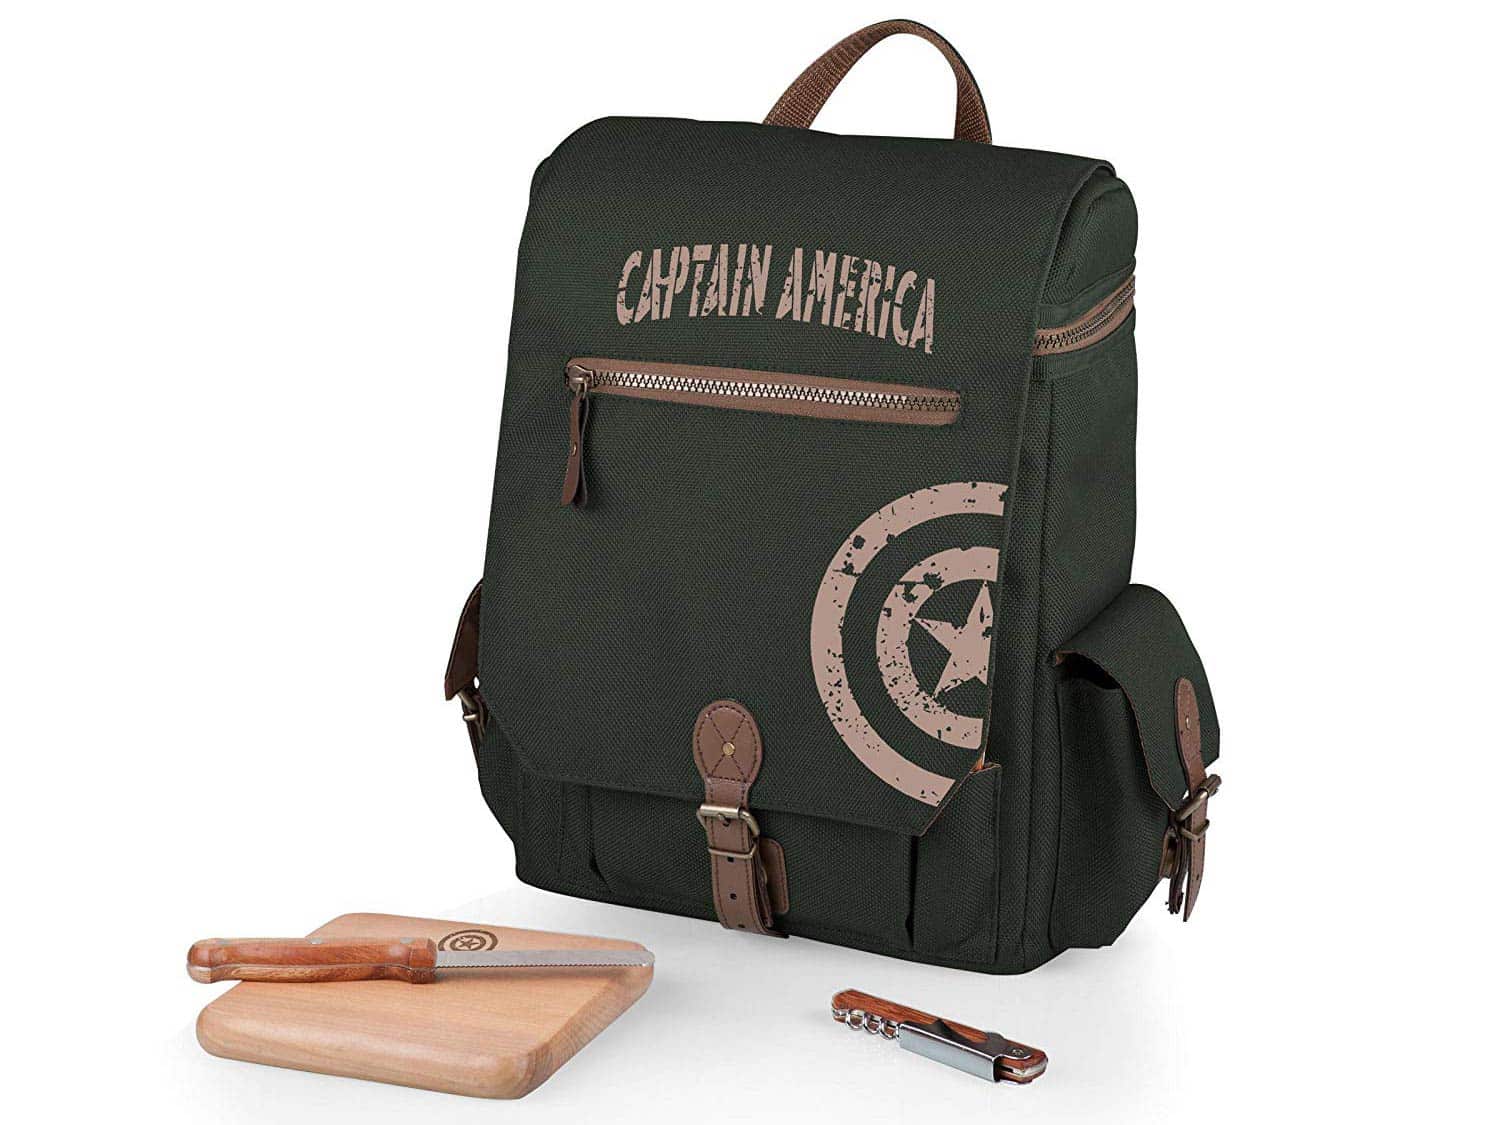 Marvel Captain America Moreno 3-Bottle Wine and Cheese Tote